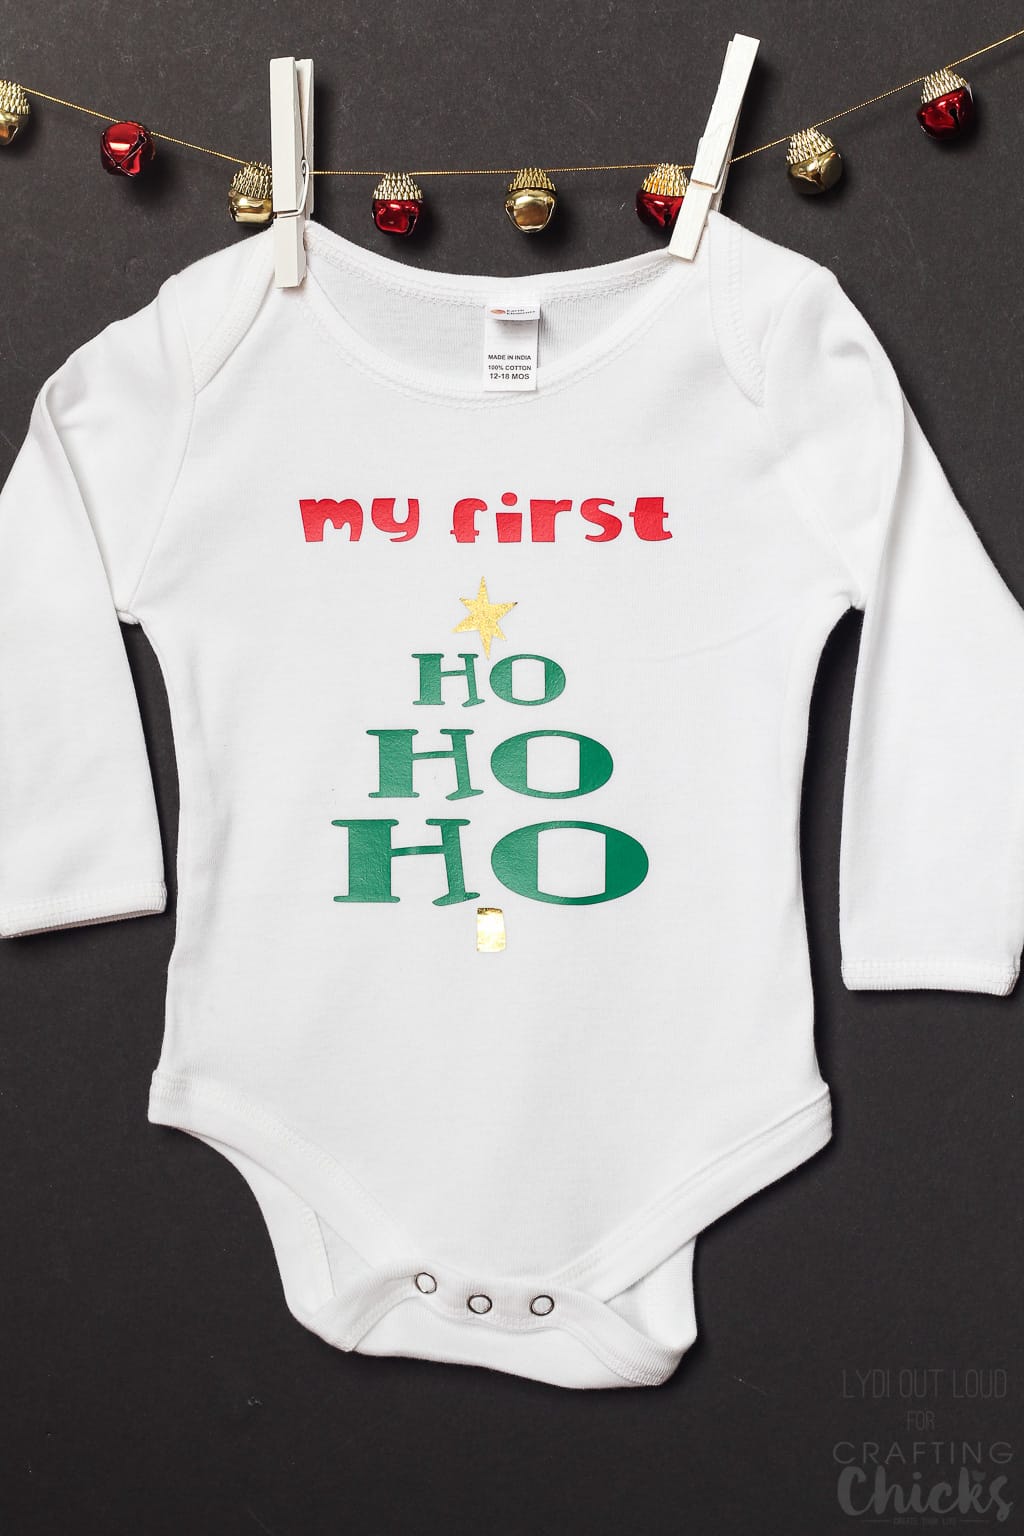 Baby's First Christmas iron-on onesie #babysfirstchristmas #ironon #diychristmasgifts #christmasgiftideas